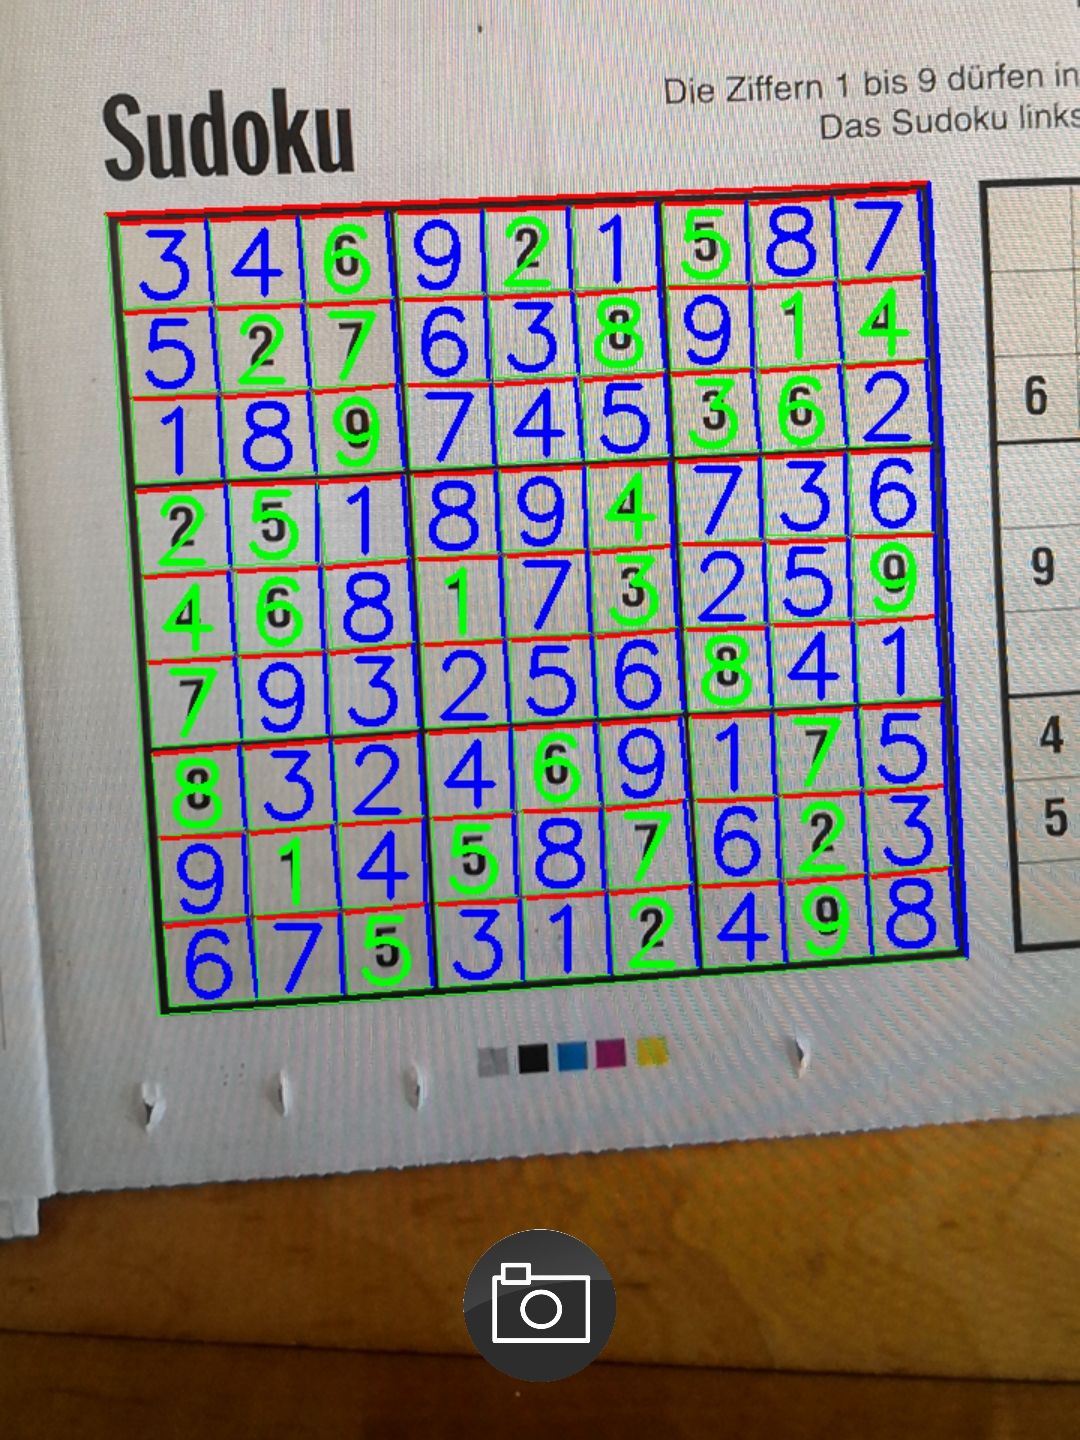 Example output of the Sudoku solver